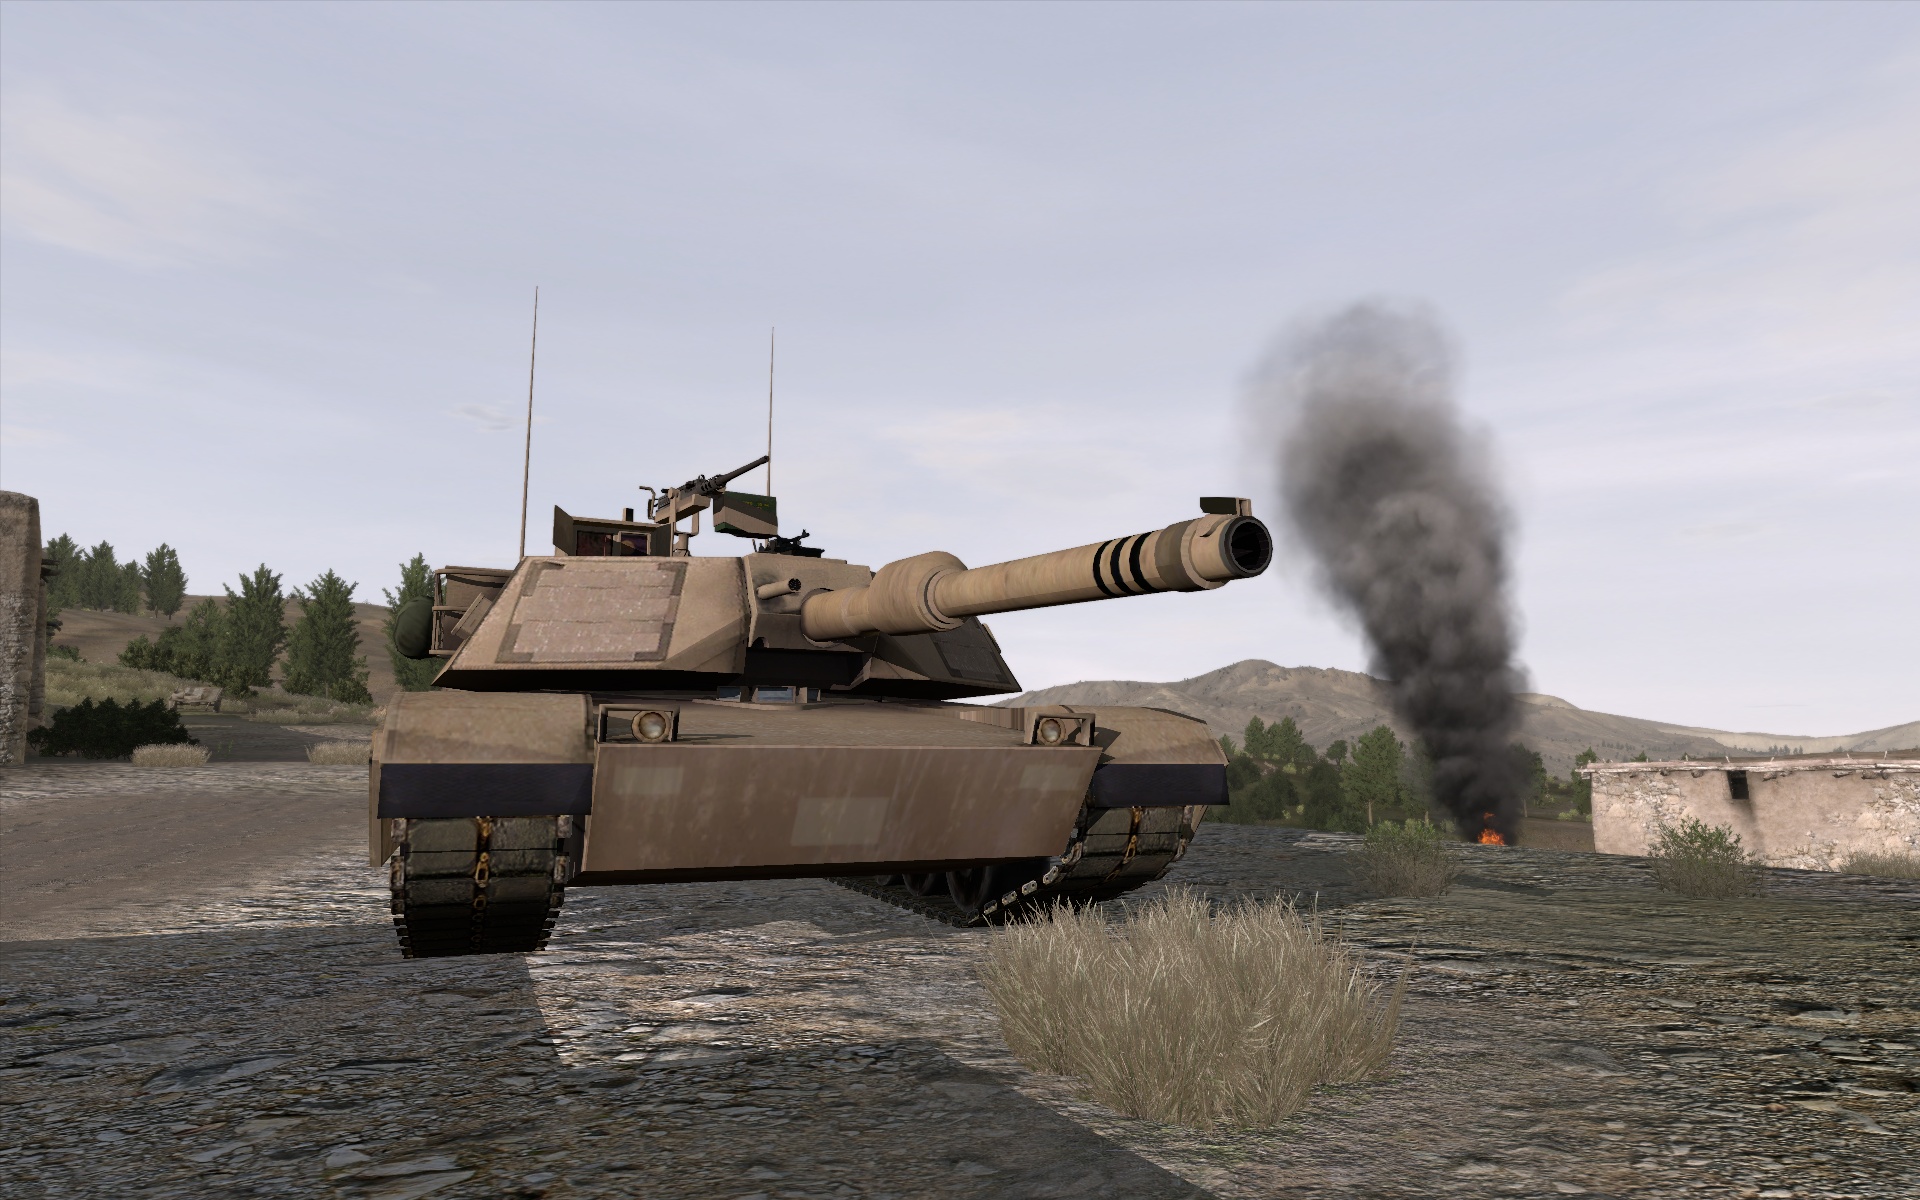 A driving simulation and image generator for armored training and convoy operations used in the Close Combat Tactical Trainer for virtual military training by the US Army